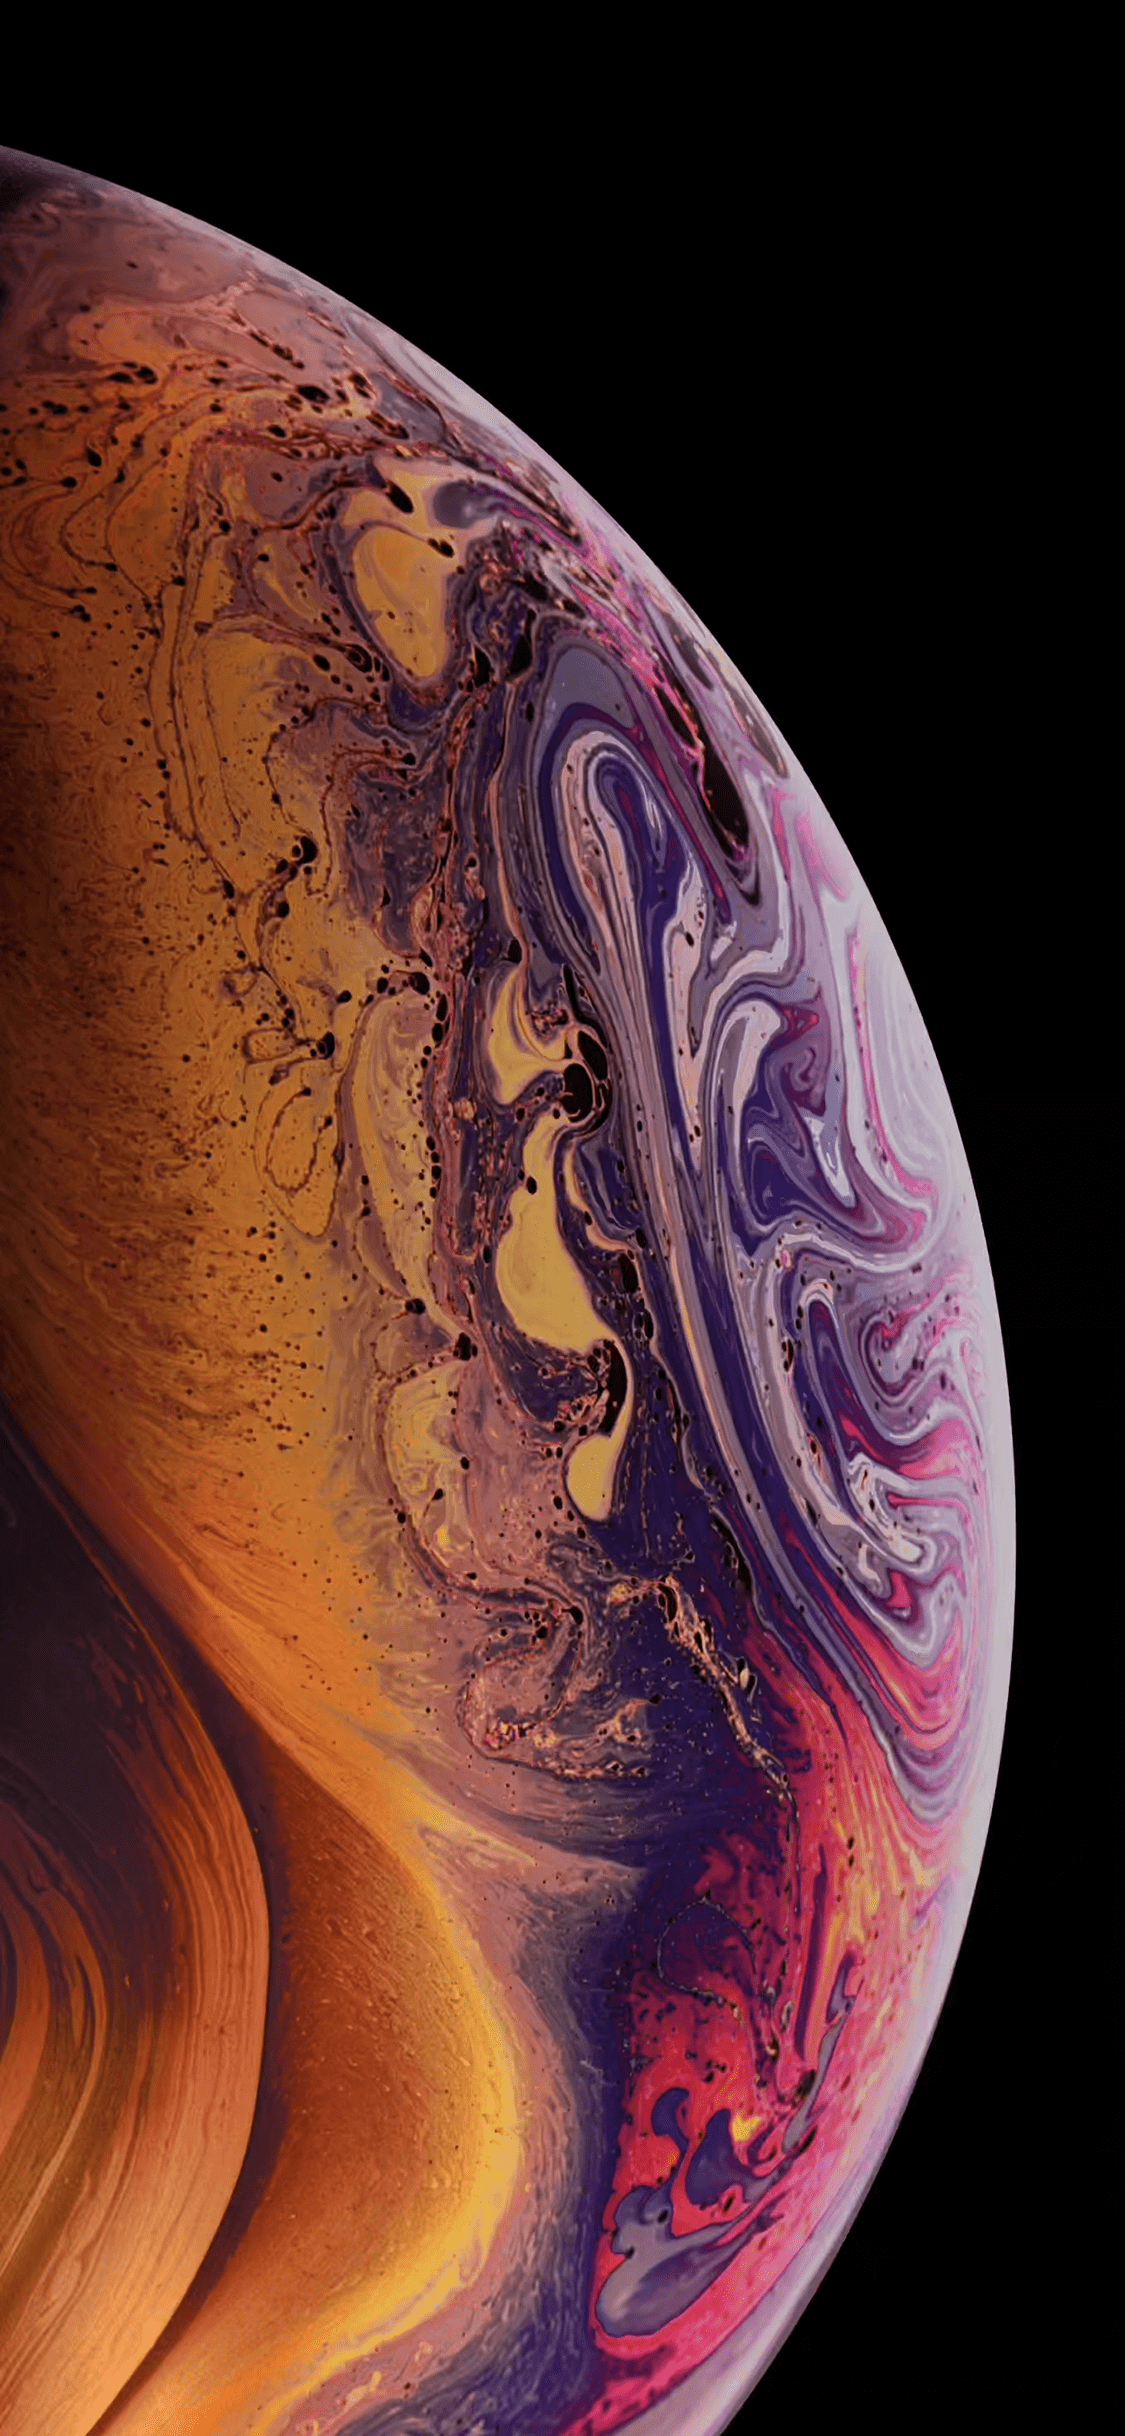 Apple Iphone Xs Max Wallpapers Top Free Apple Iphone Xs